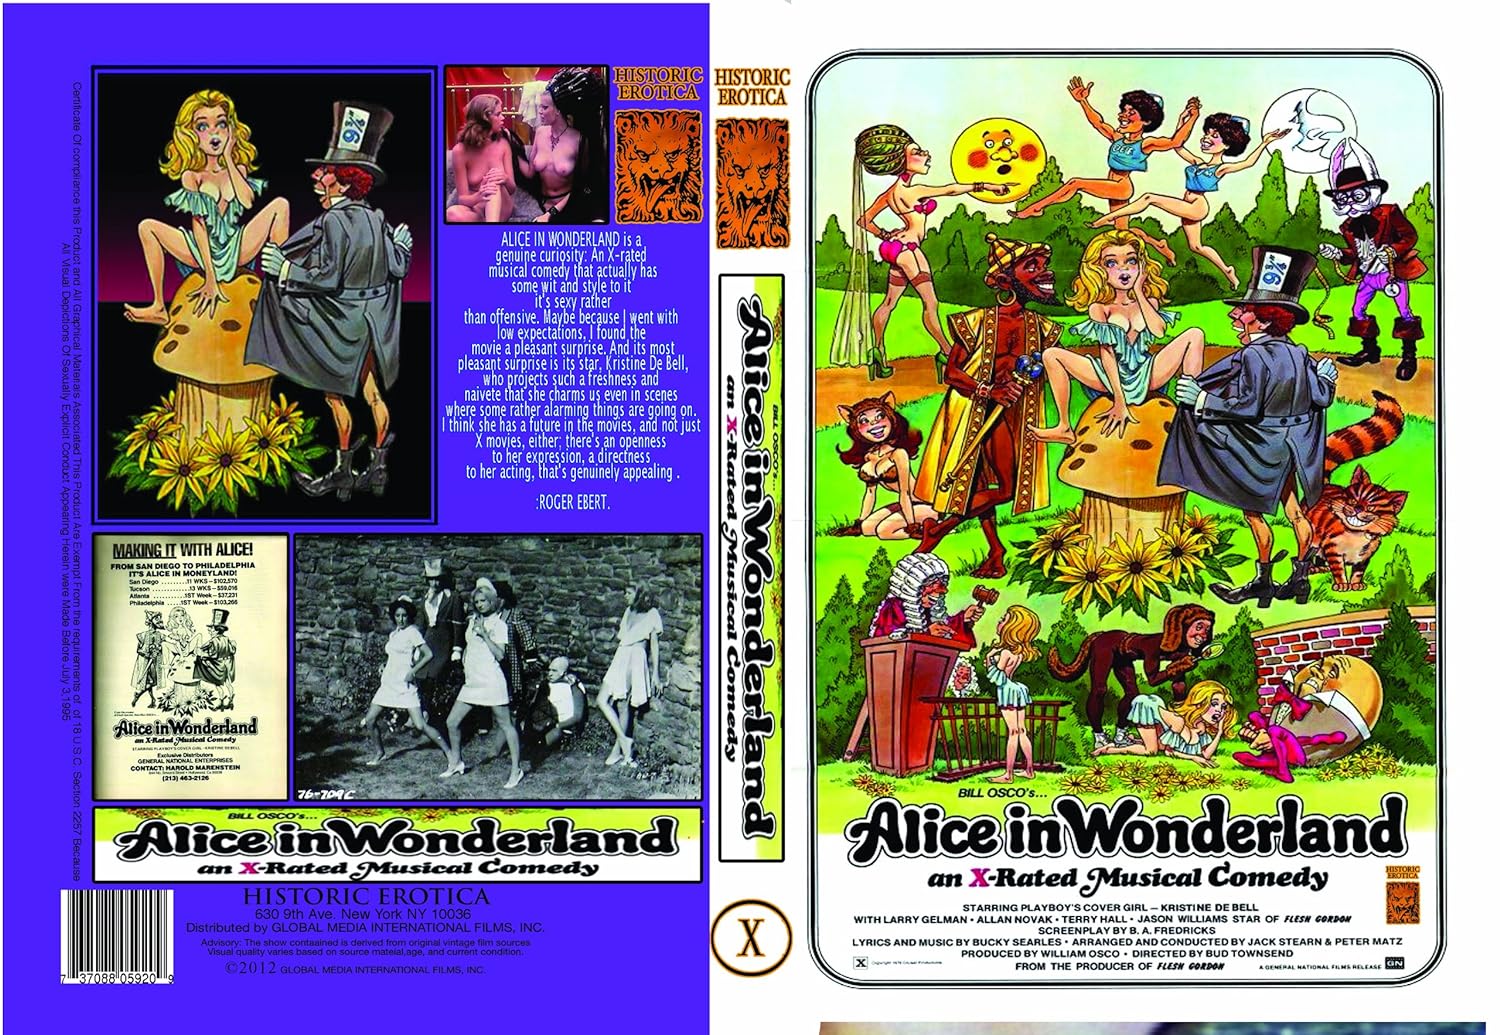 Alice in wonderland x rated musical